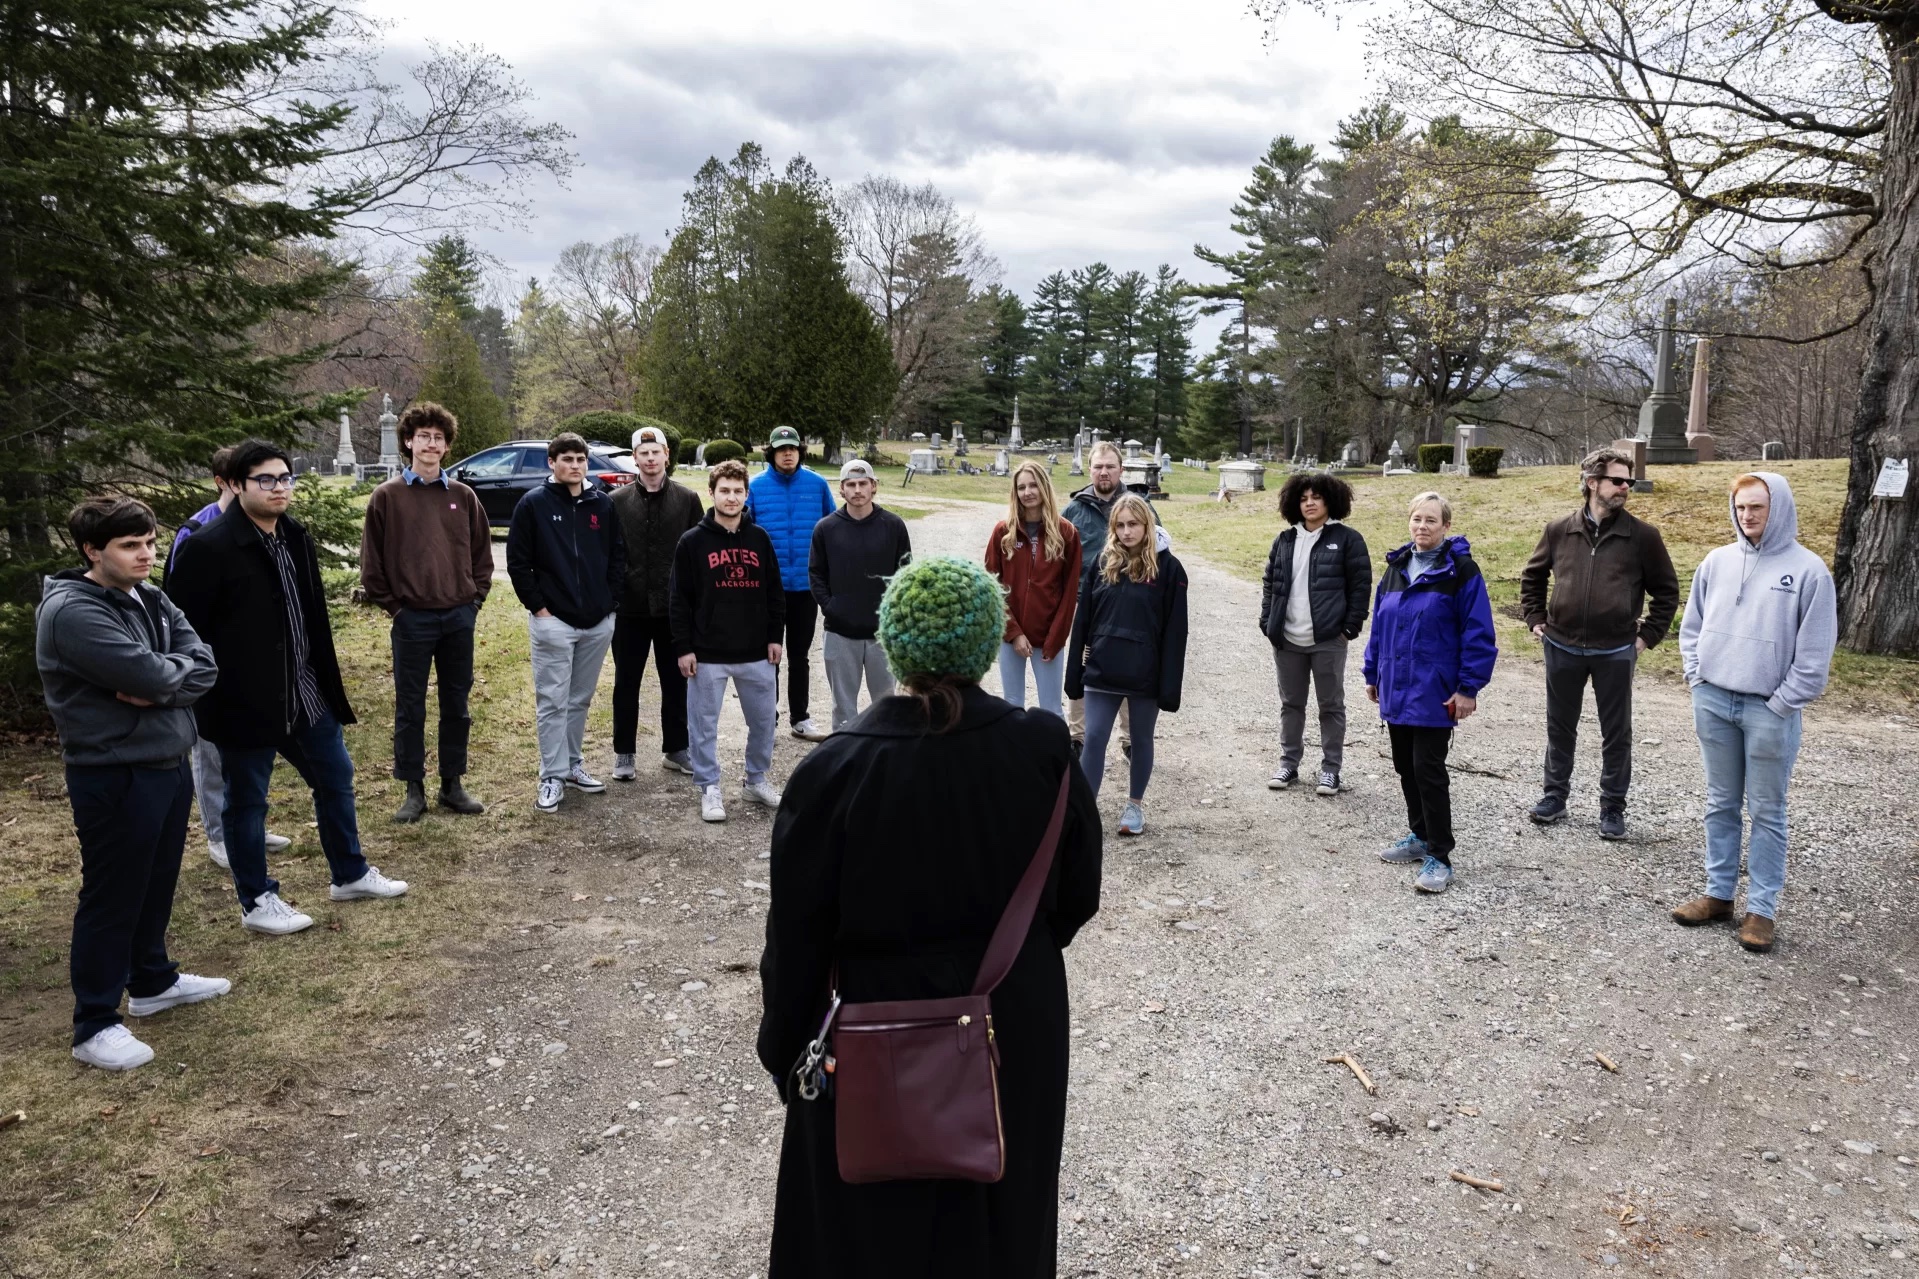 Bates News: Bates Students Create a Self-Guided Tour of Riverside Cemetery that tells Historical Stories of Lewiston